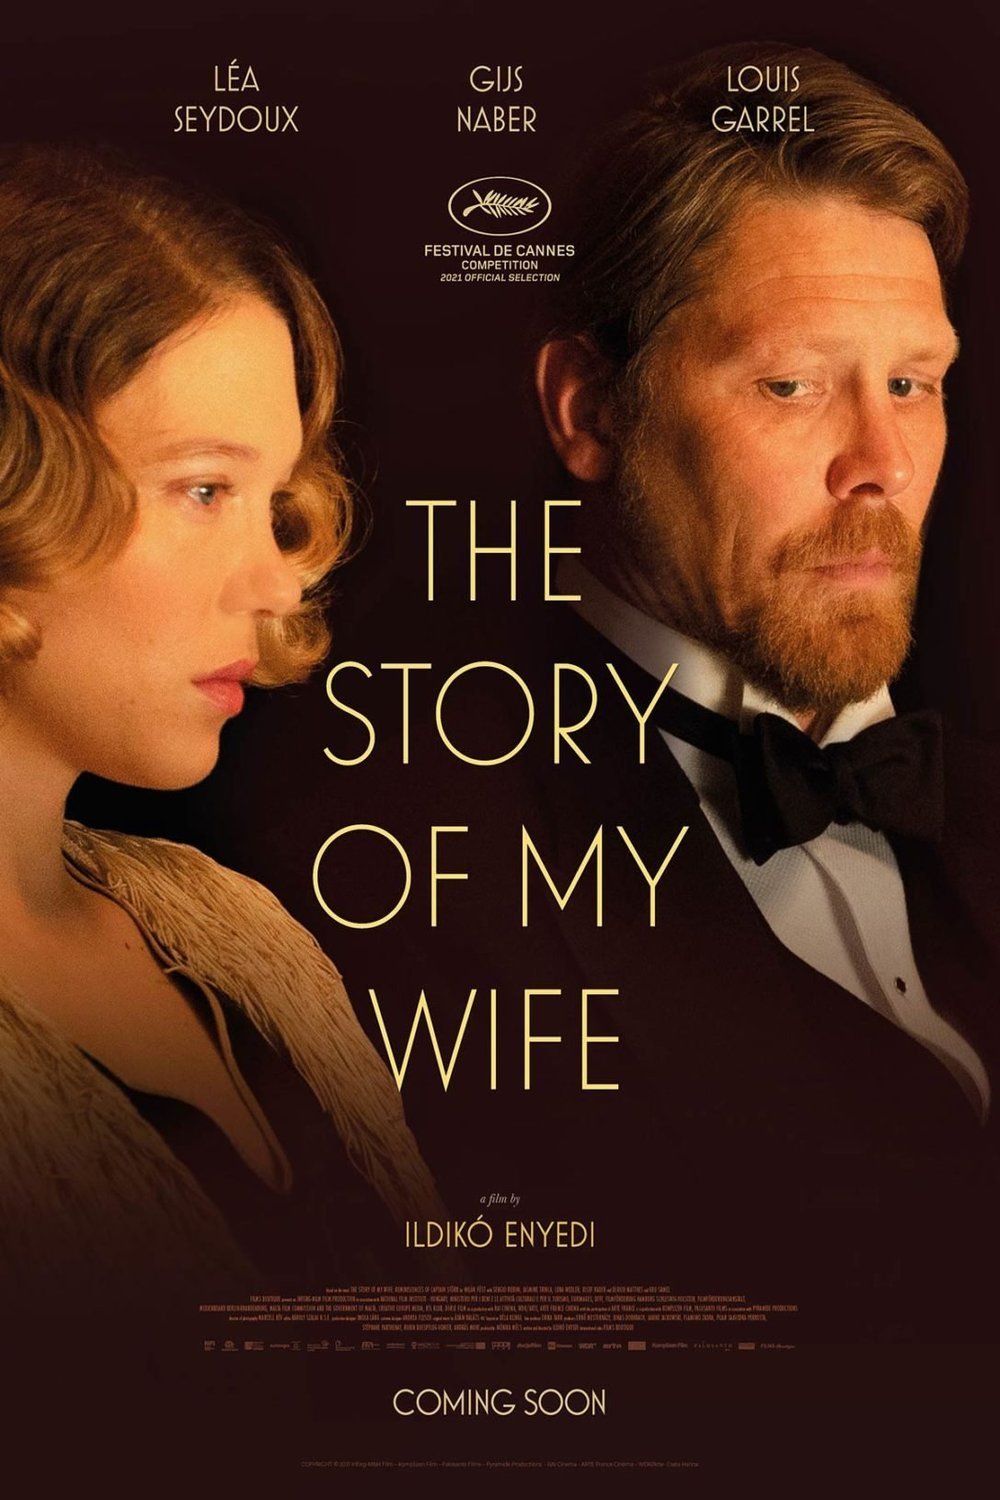 L'affiche du film The Story of My Wife